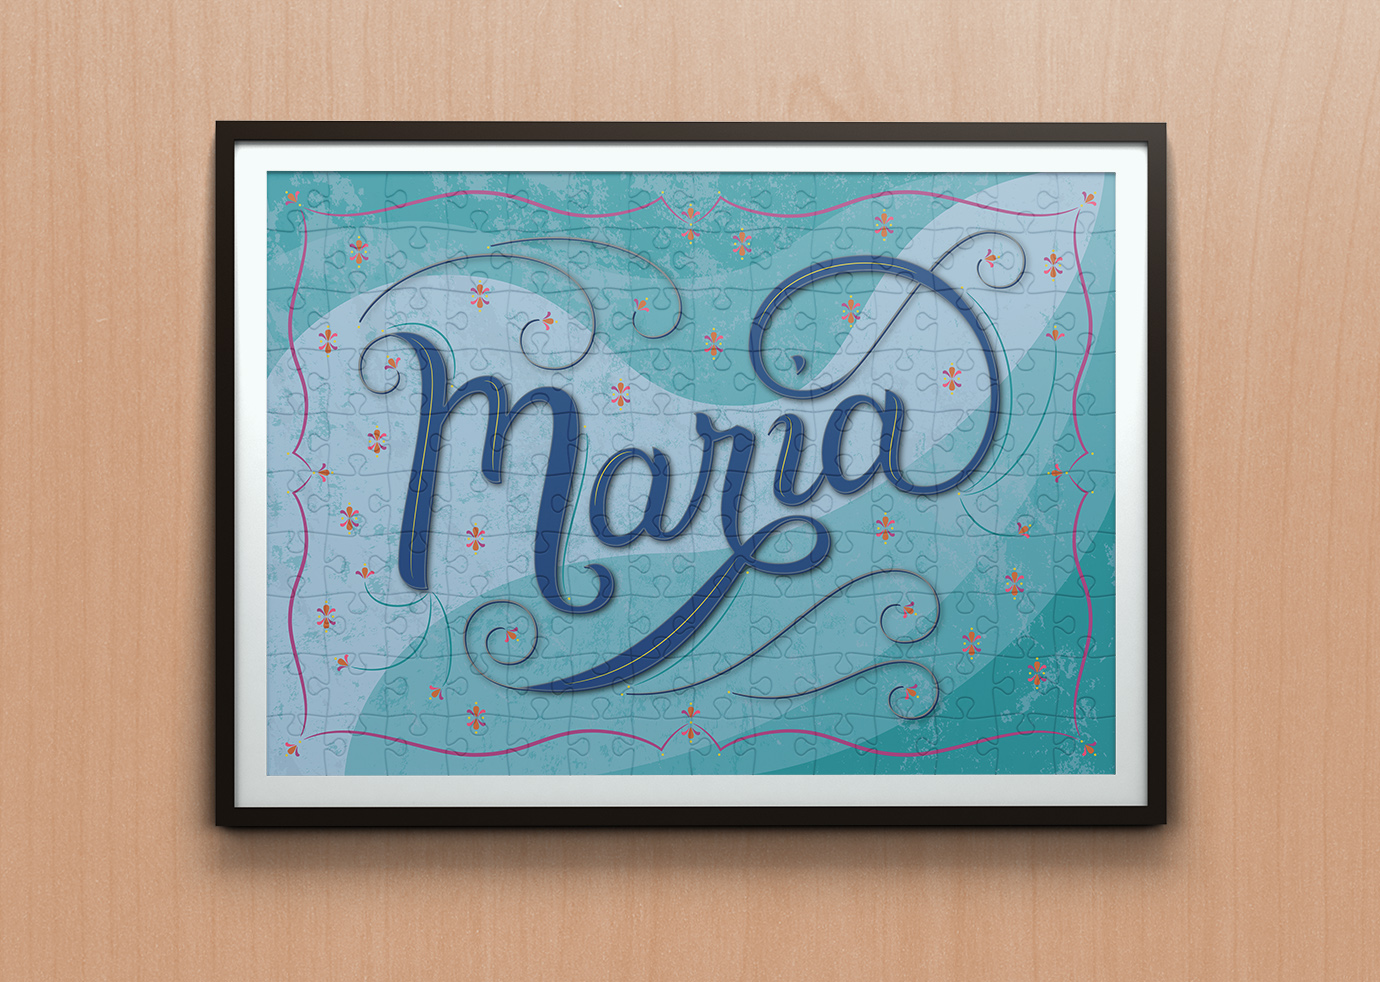 Puzzle mockup of lettering piece "Maria"